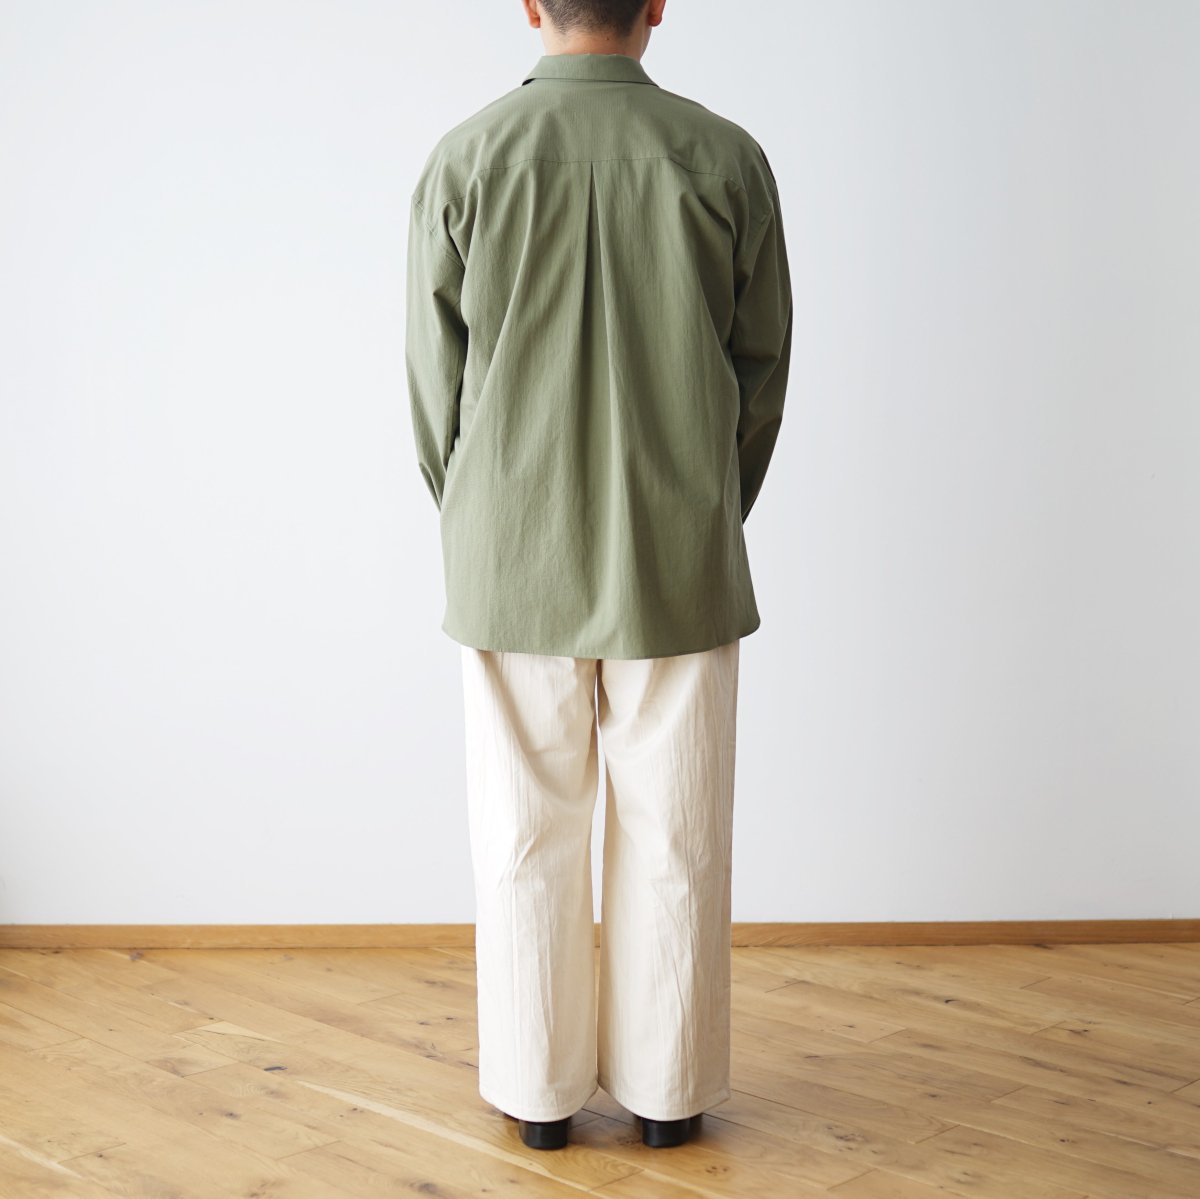 POLYPLOID ポリプロイド】 SHIRT JACKET "C" - OLIVE / PARK ONLINE STORE